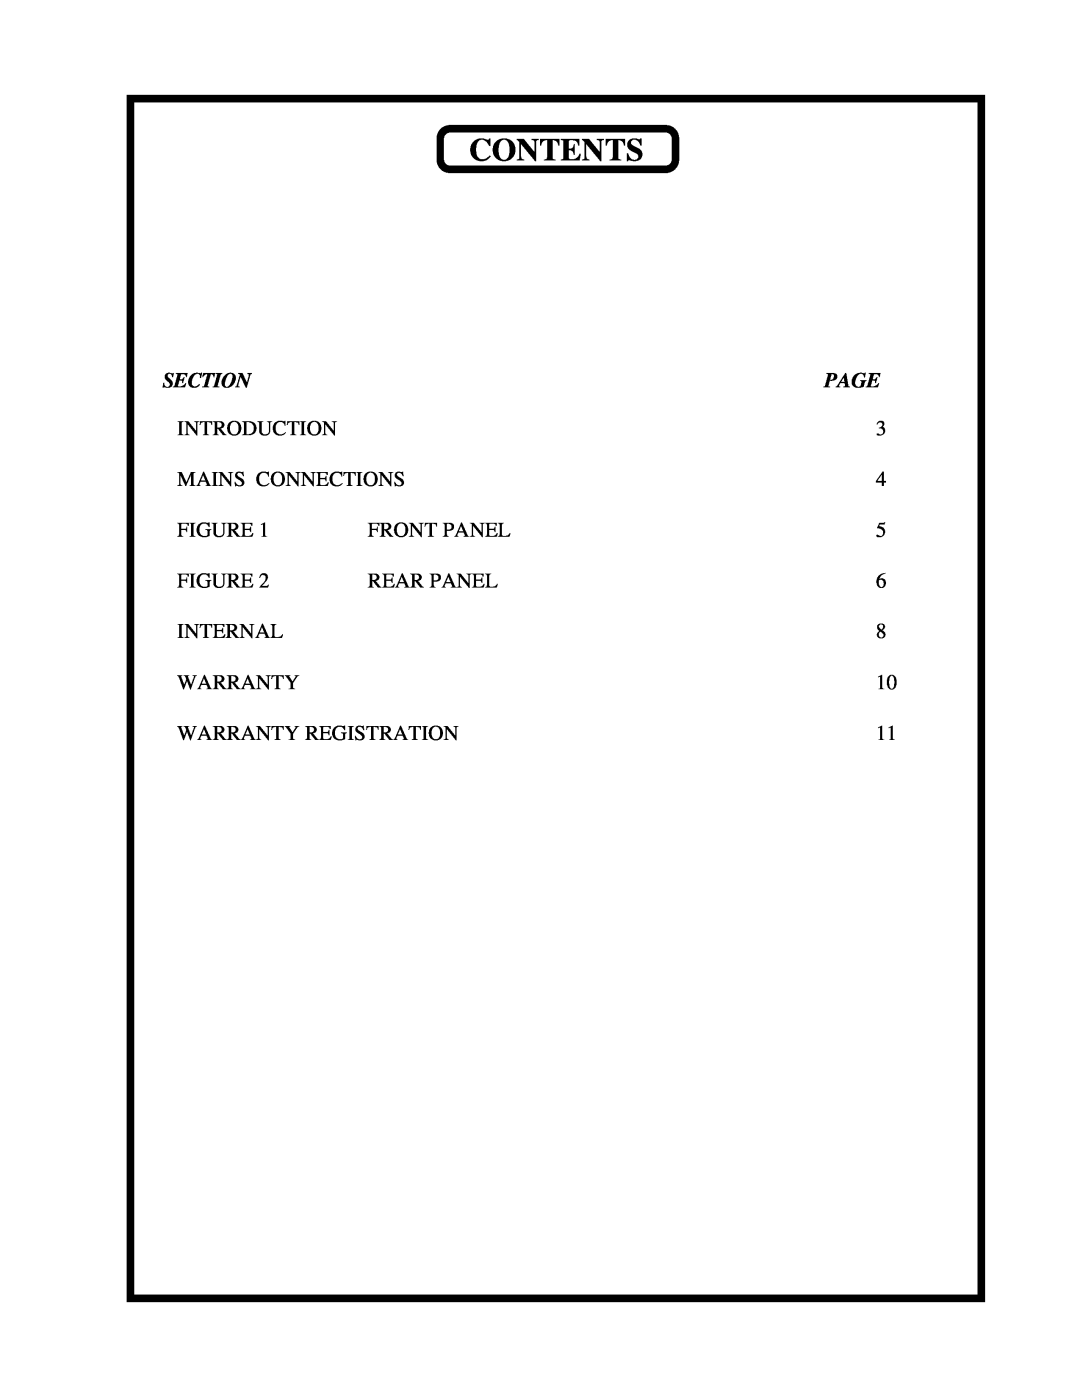 Manley Labs MANLEY REFERENCE DIGITAL TO ANALOGUE CONVERTER owner manual Contents, Section, Page 